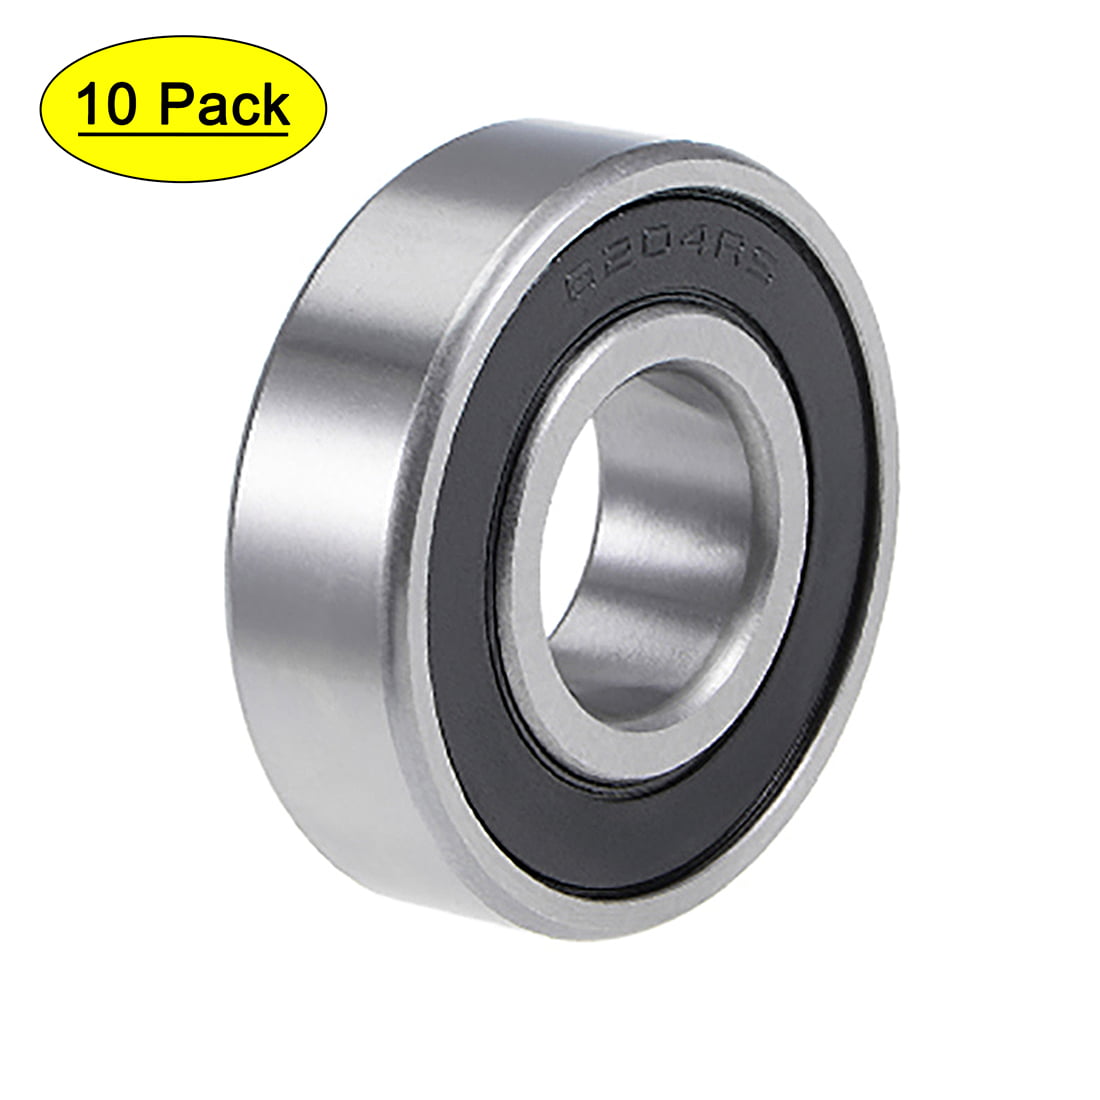 ONE NEW LOT OF 10 REPLACEMENT SPINDLE BEARINGS 6204-2RS. 